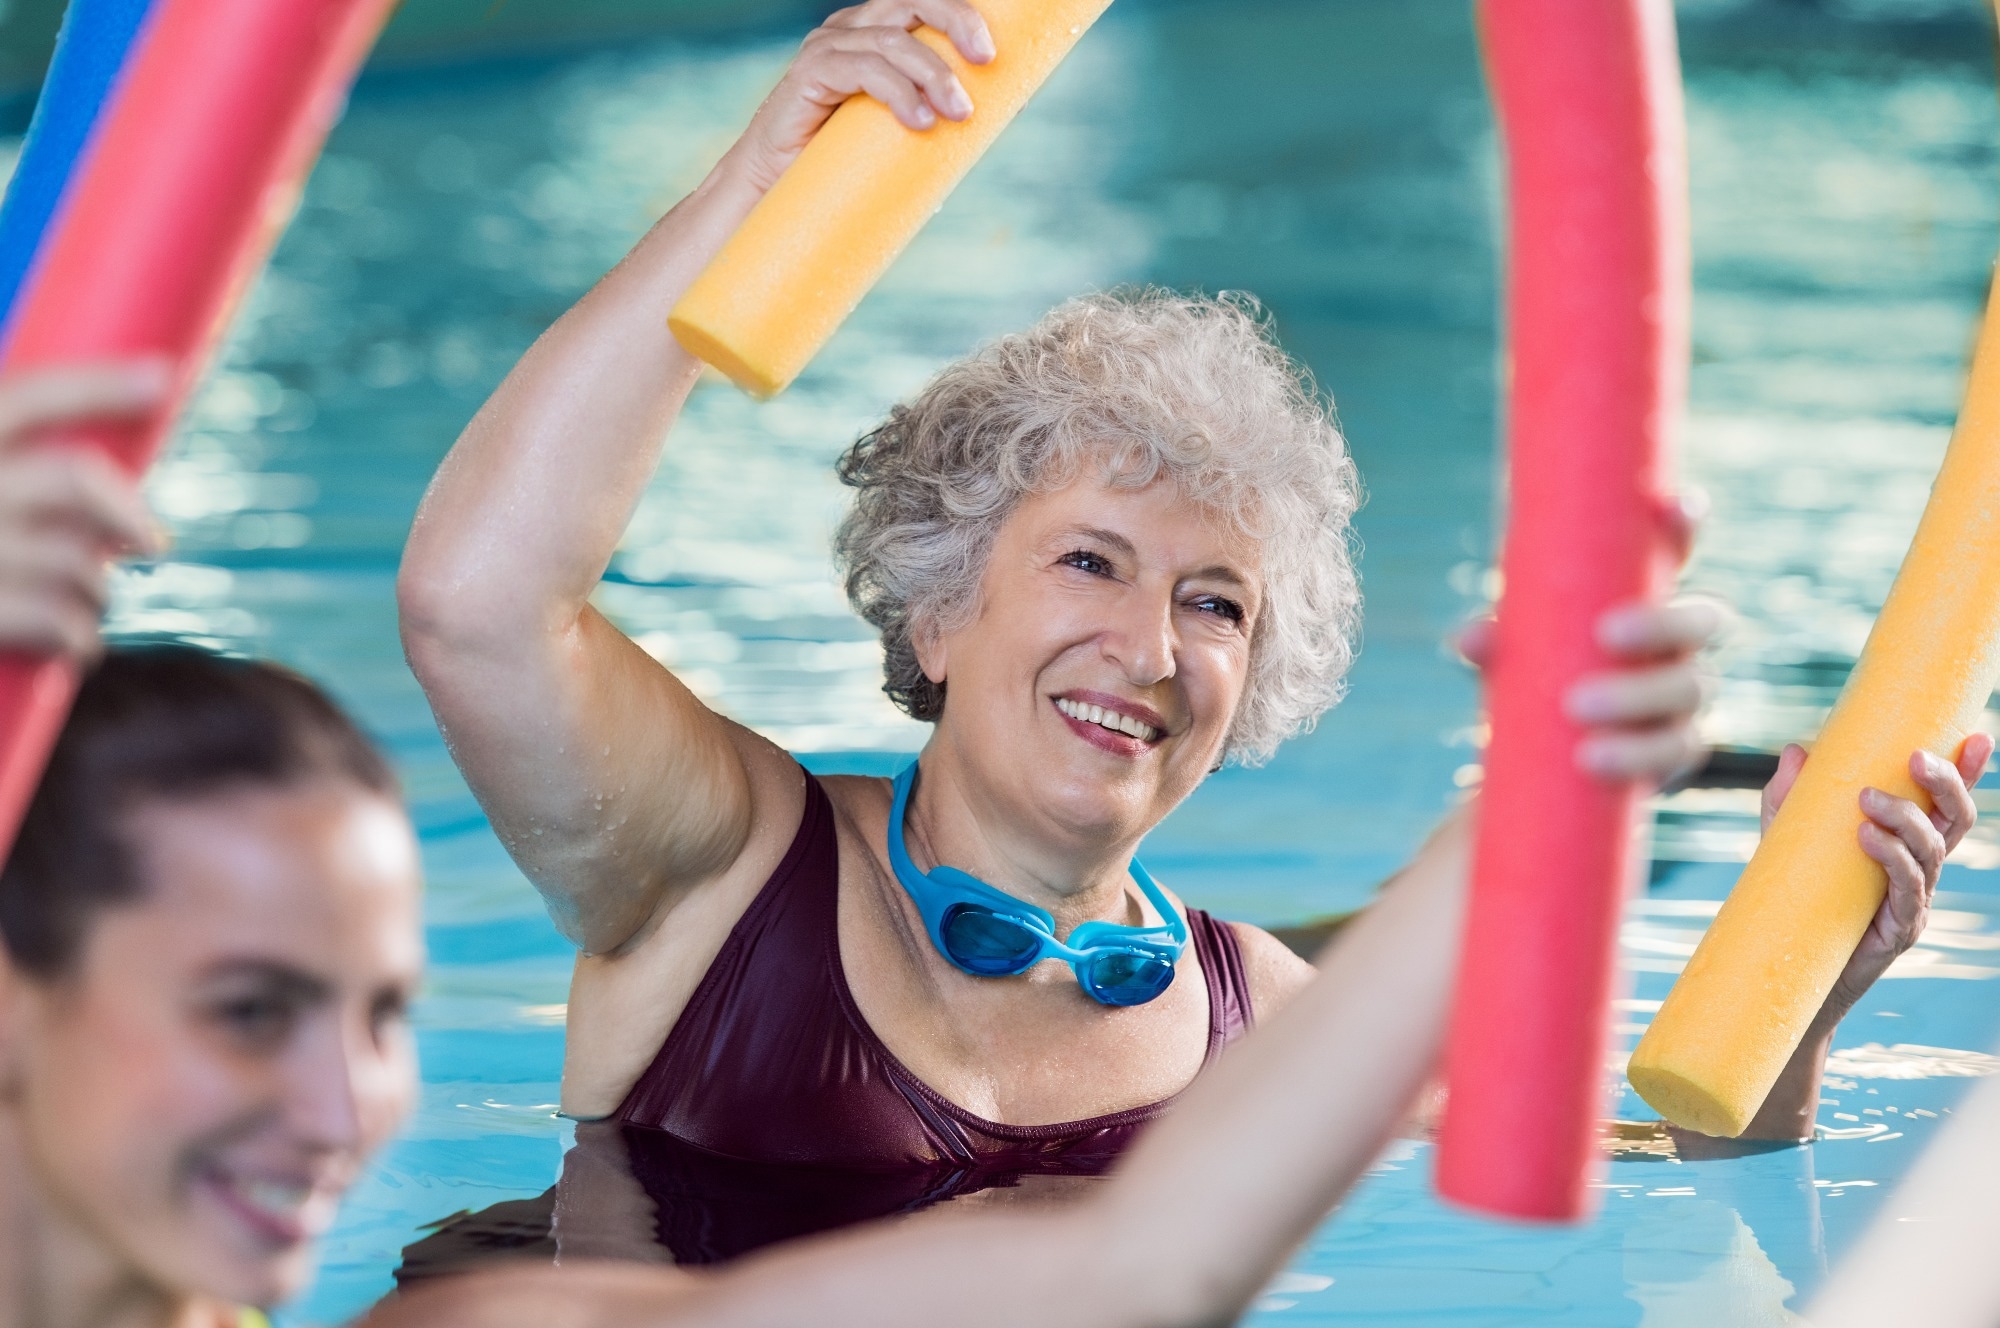 Study: The effects of a moderate physical activity intervention on physical fitness and cognition in healthy elderly with low levels of physical activity: a randomized controlled trial. Image Credit: Ground Picture / Shutterstock